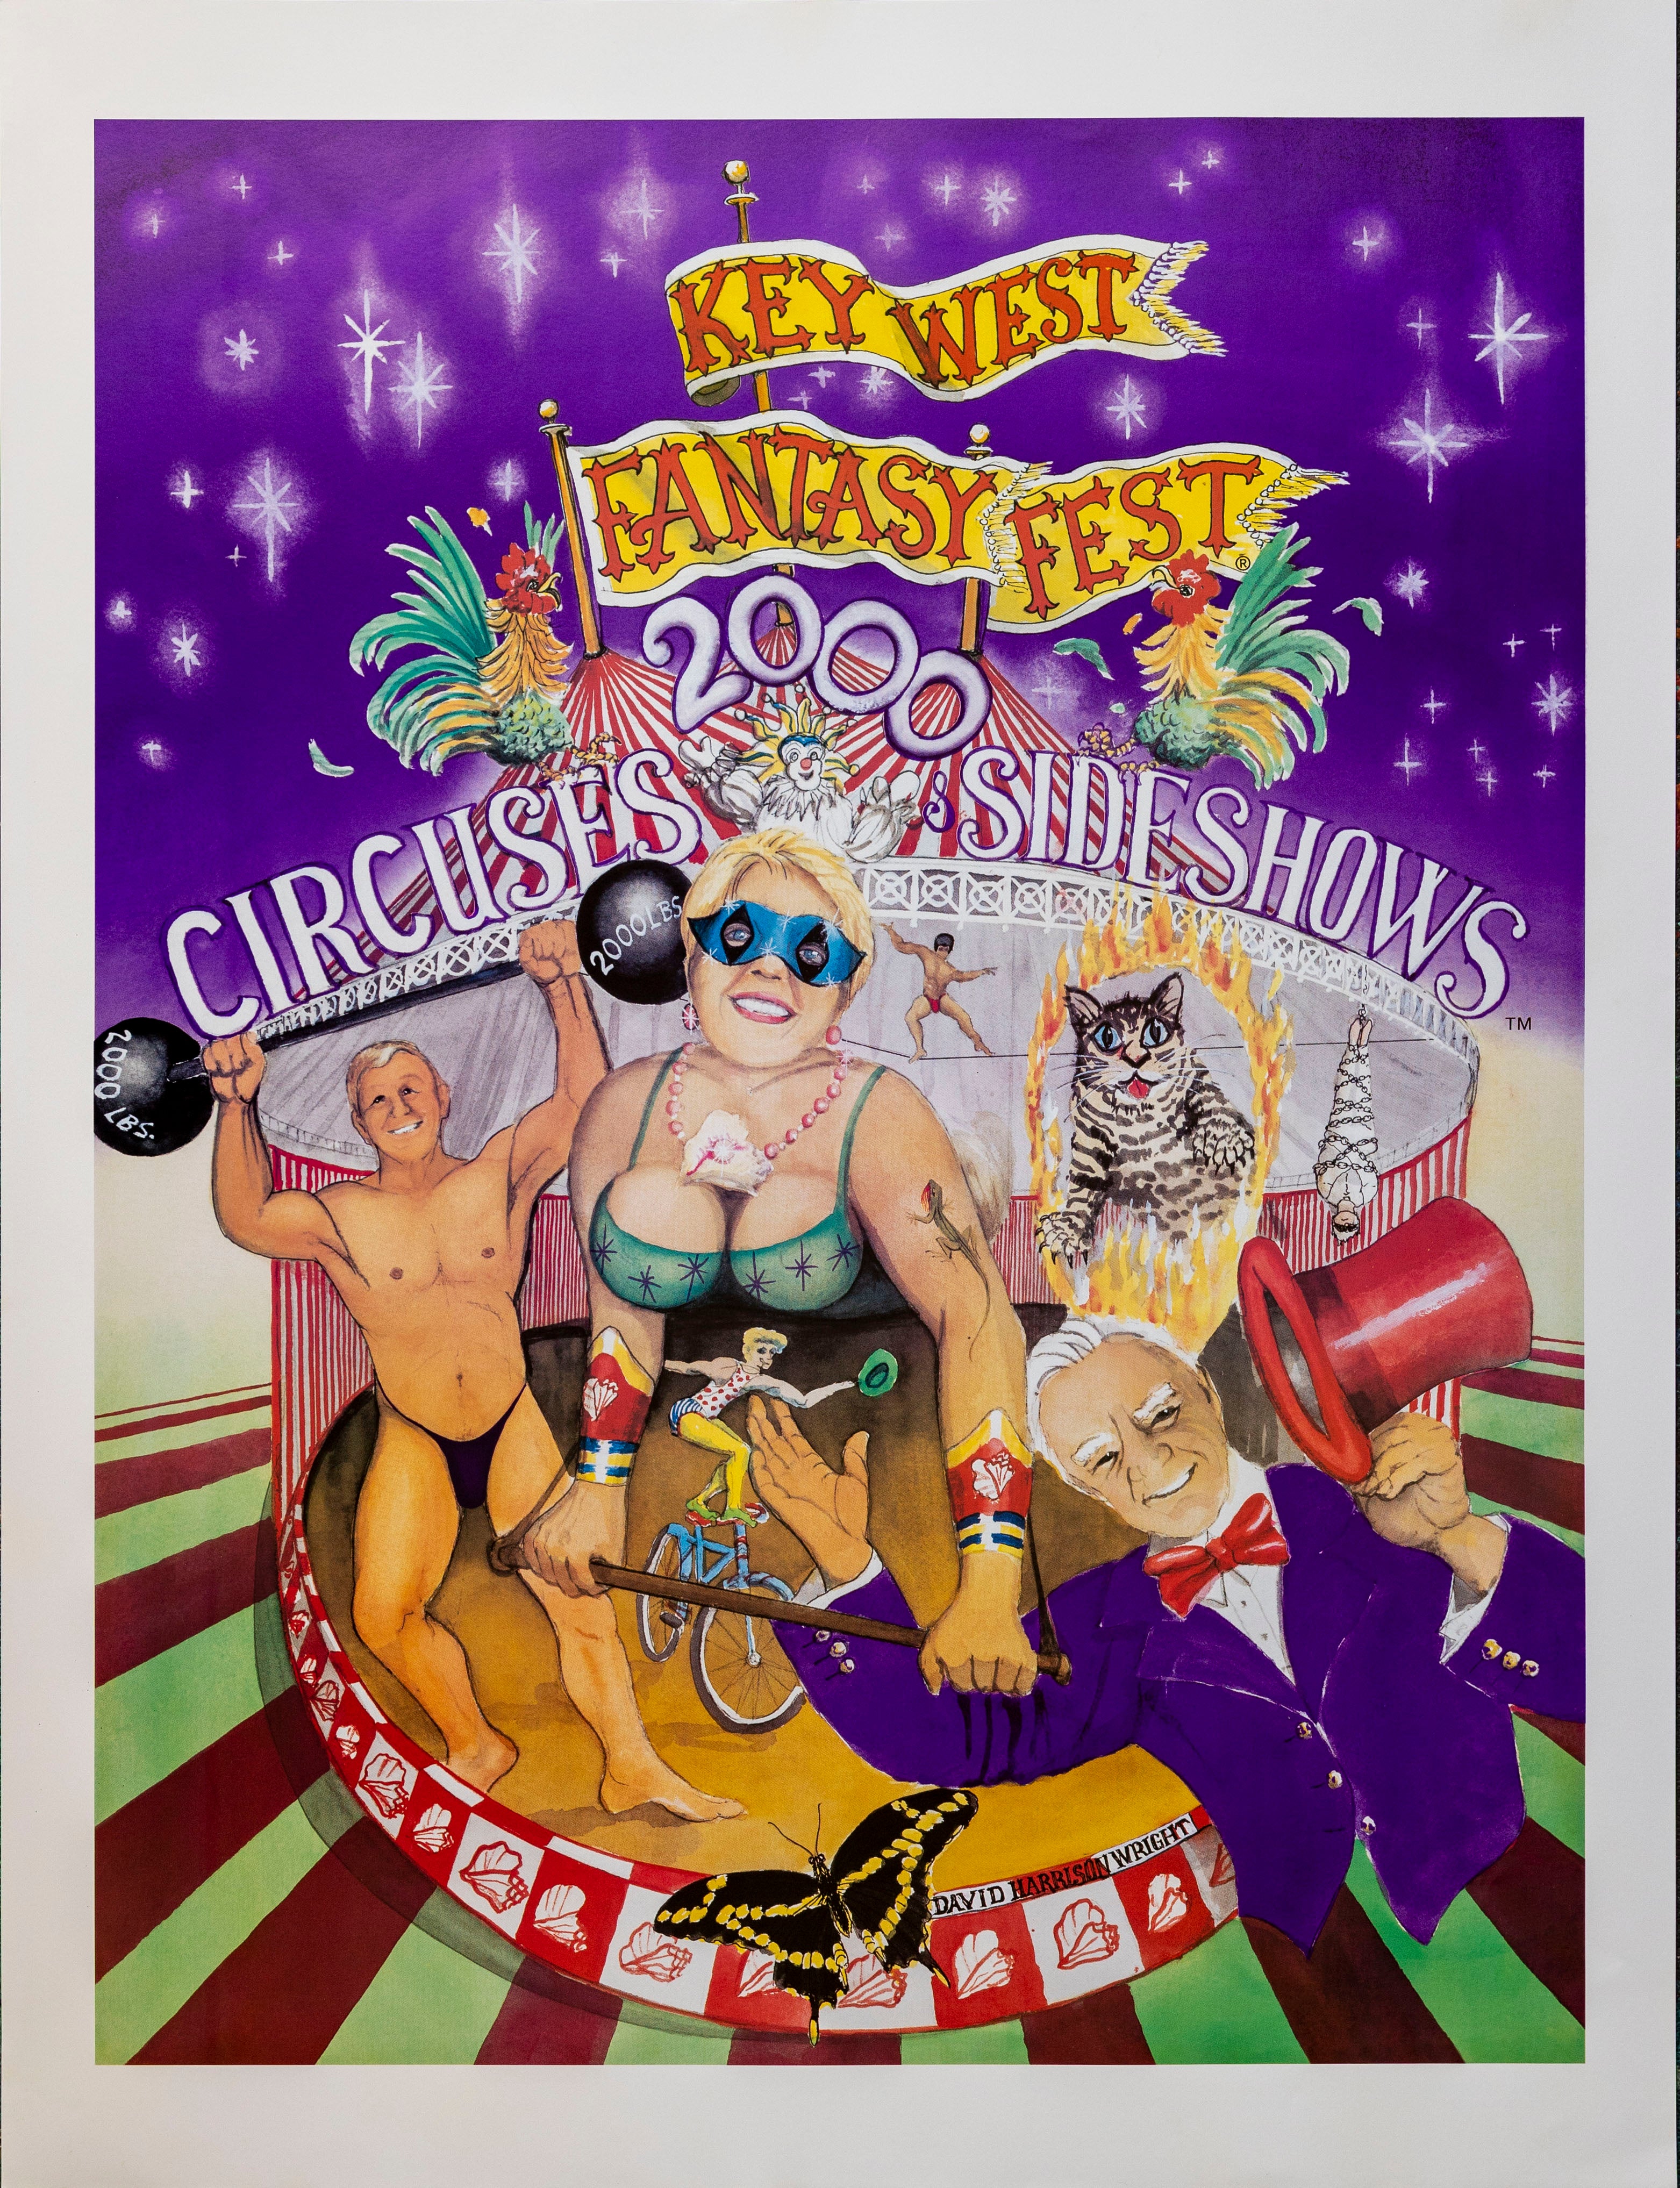 Official 2000 Fantasy Fest Poster Circuses and Sideshows by David Harrison Wright